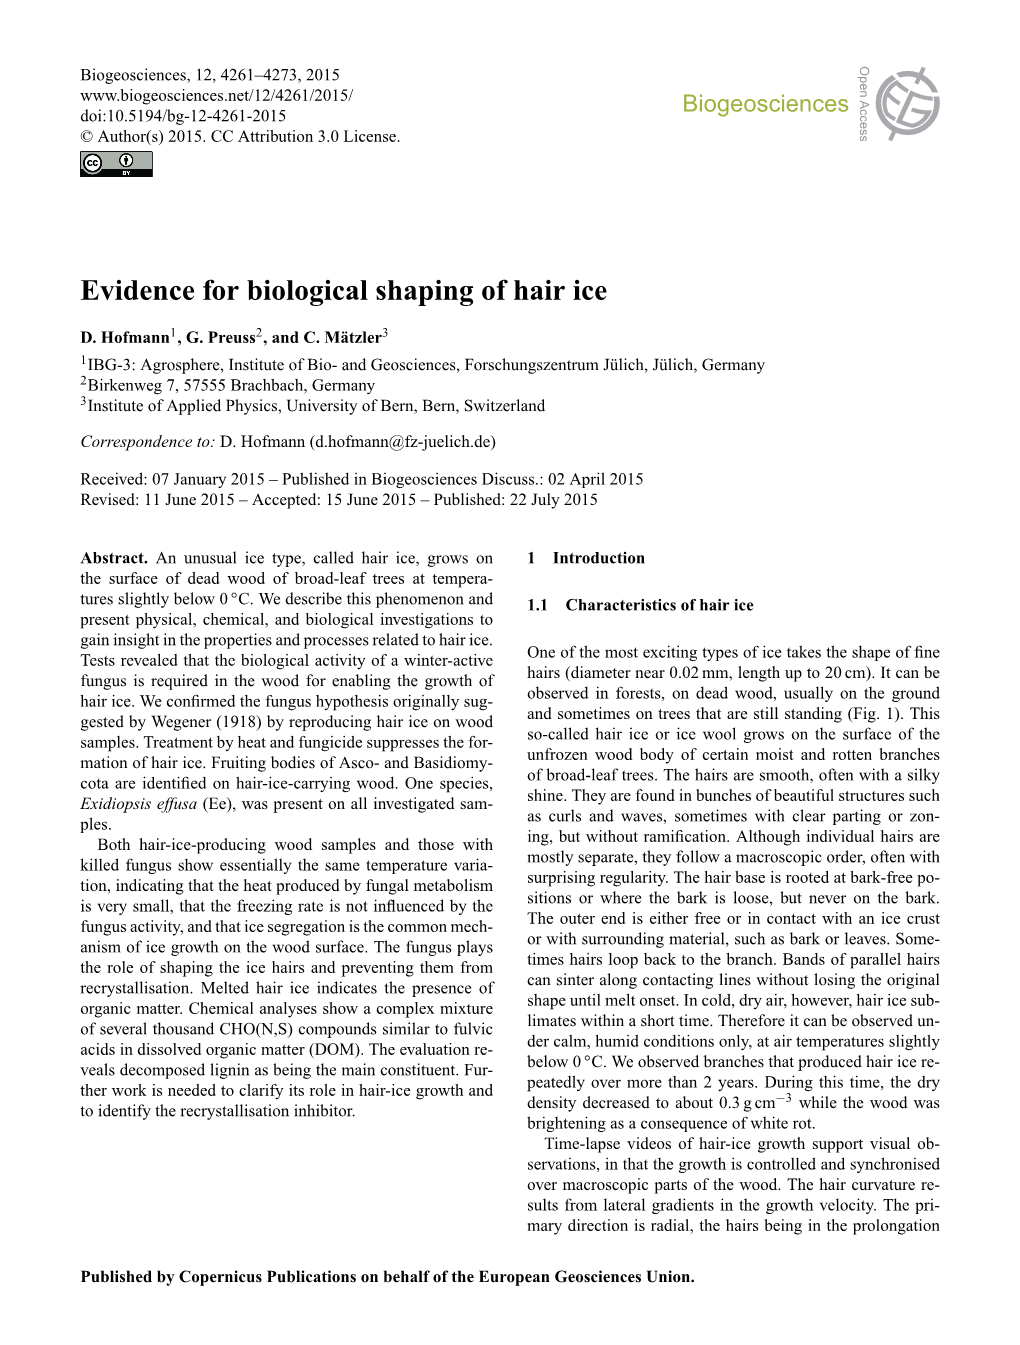 Evidence for Biological Shaping of Hair Ice